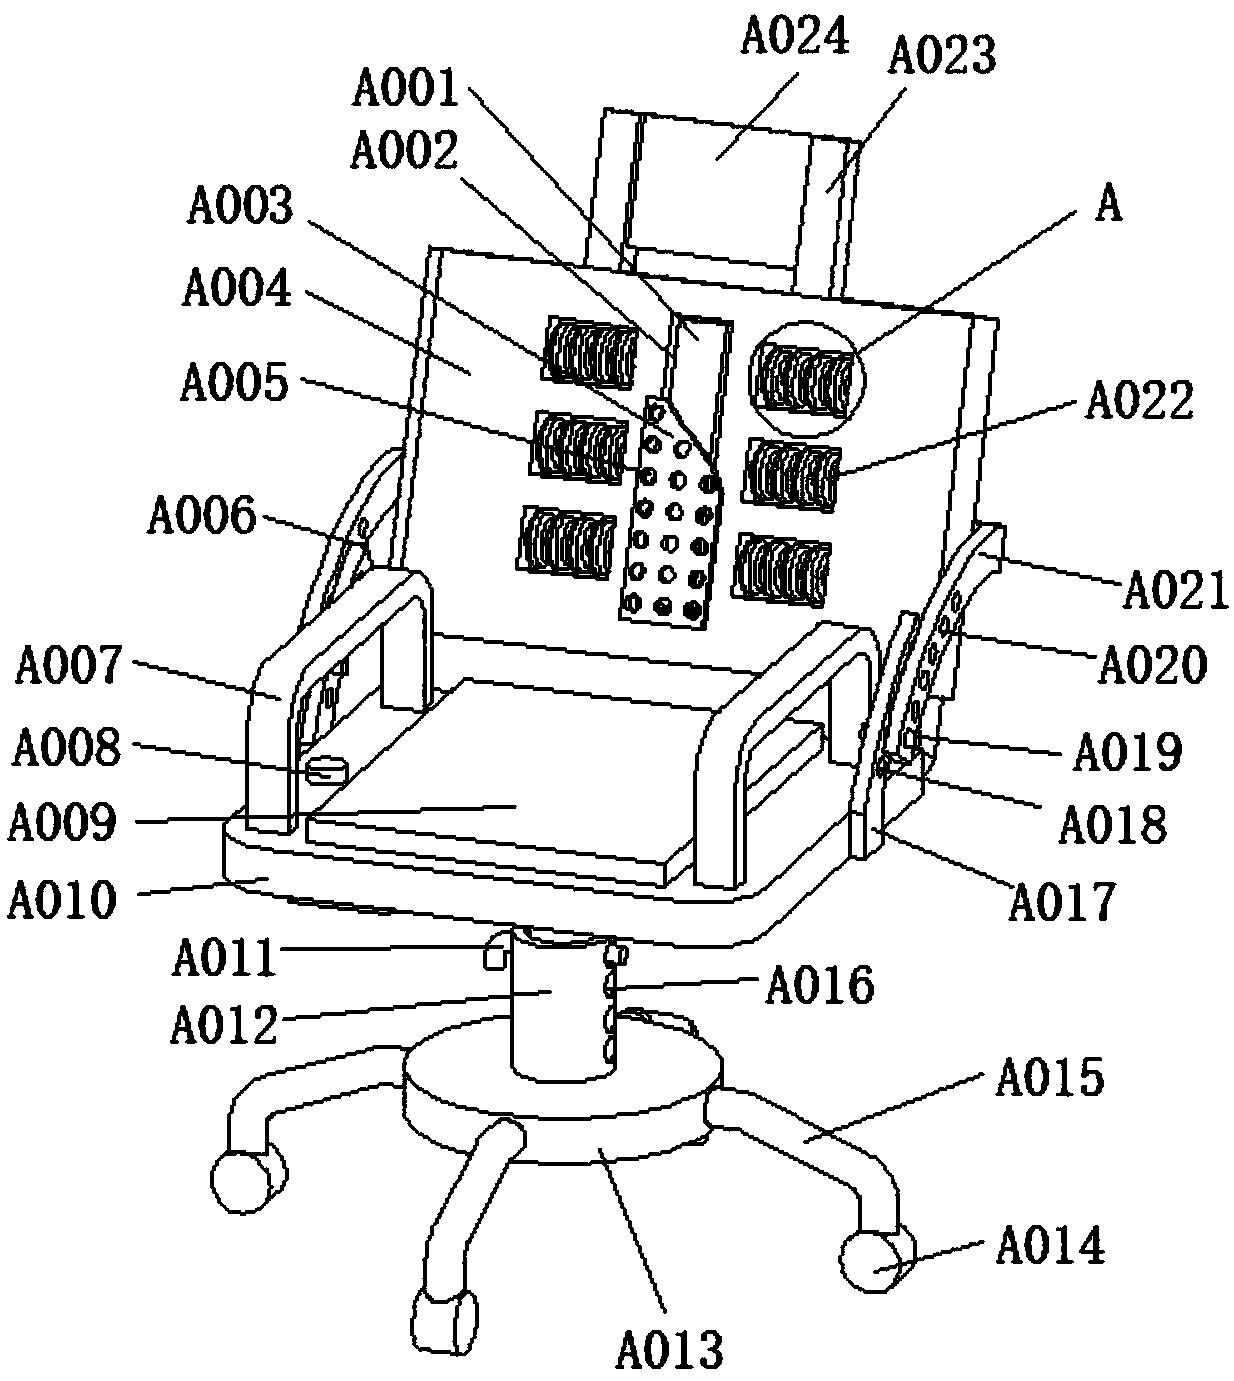 Treatment chair for orthopedics spinal injury with treatment effect